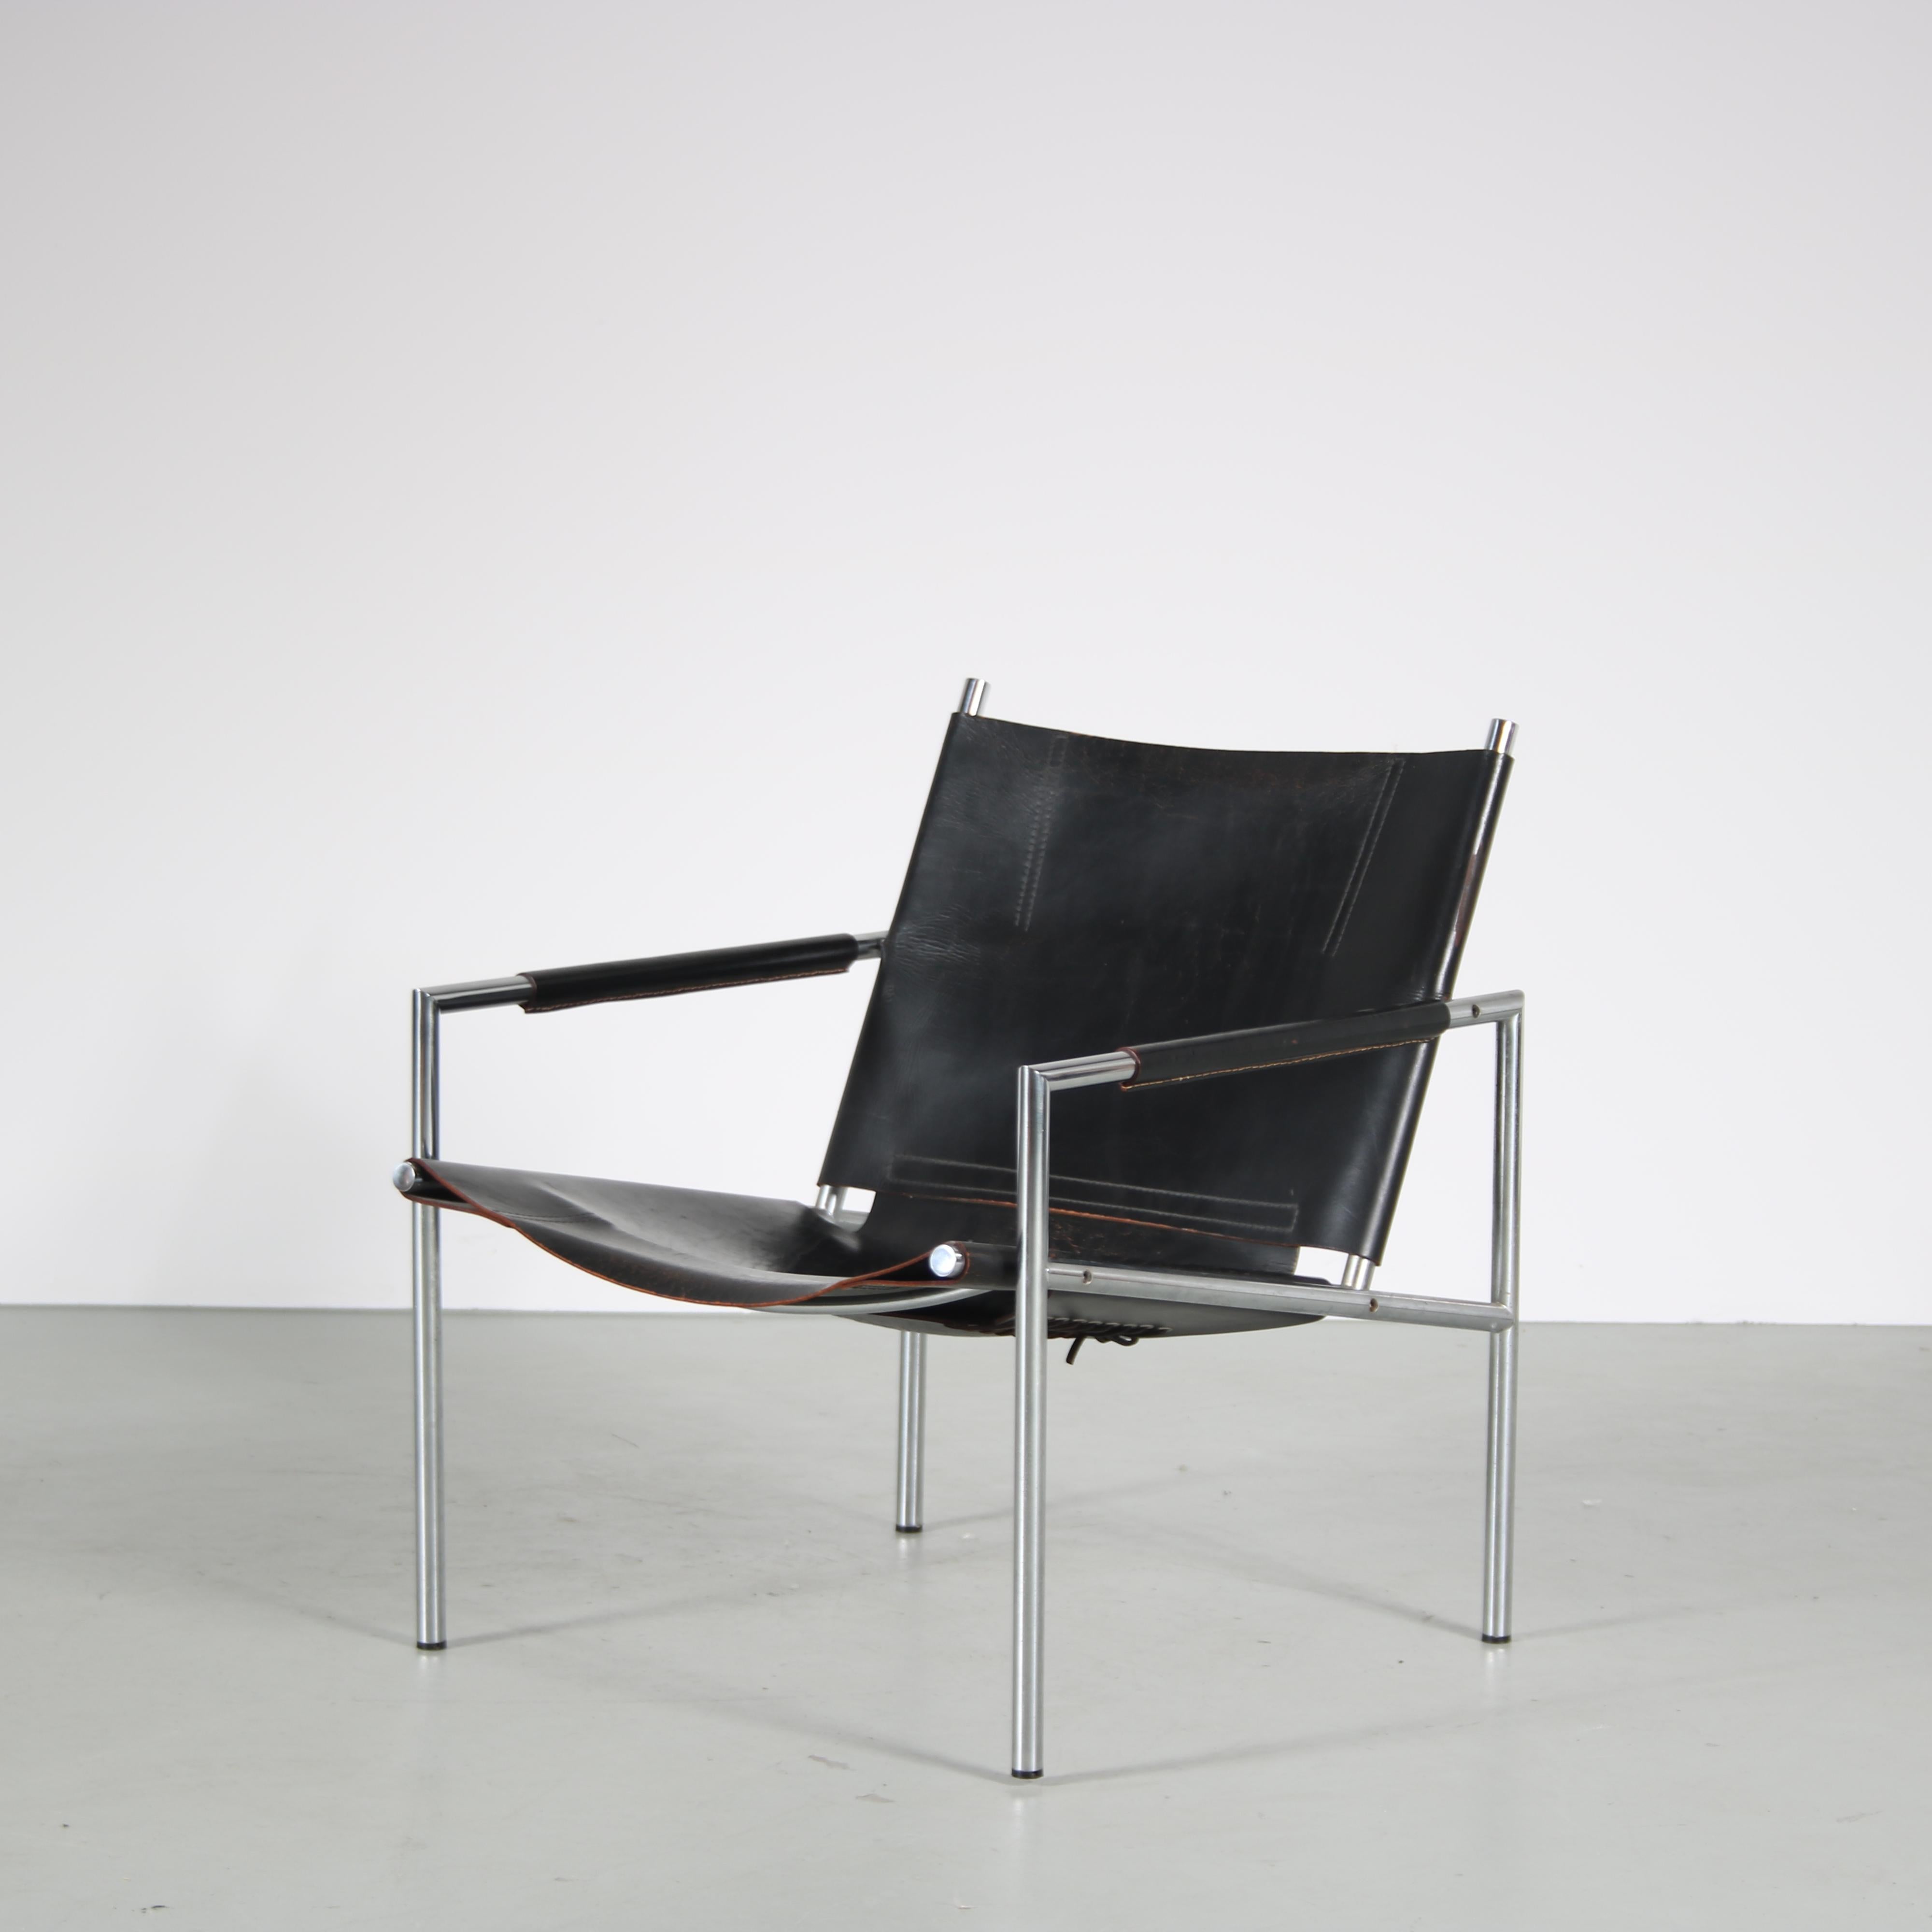 A beautiful lounge chair manufactured in Germany around 1960.

This modern chair has a tubular, stainless steel frame. The seat and back are made of thick quality black neck leather and are hanging in the frame. The leather covered armrests match